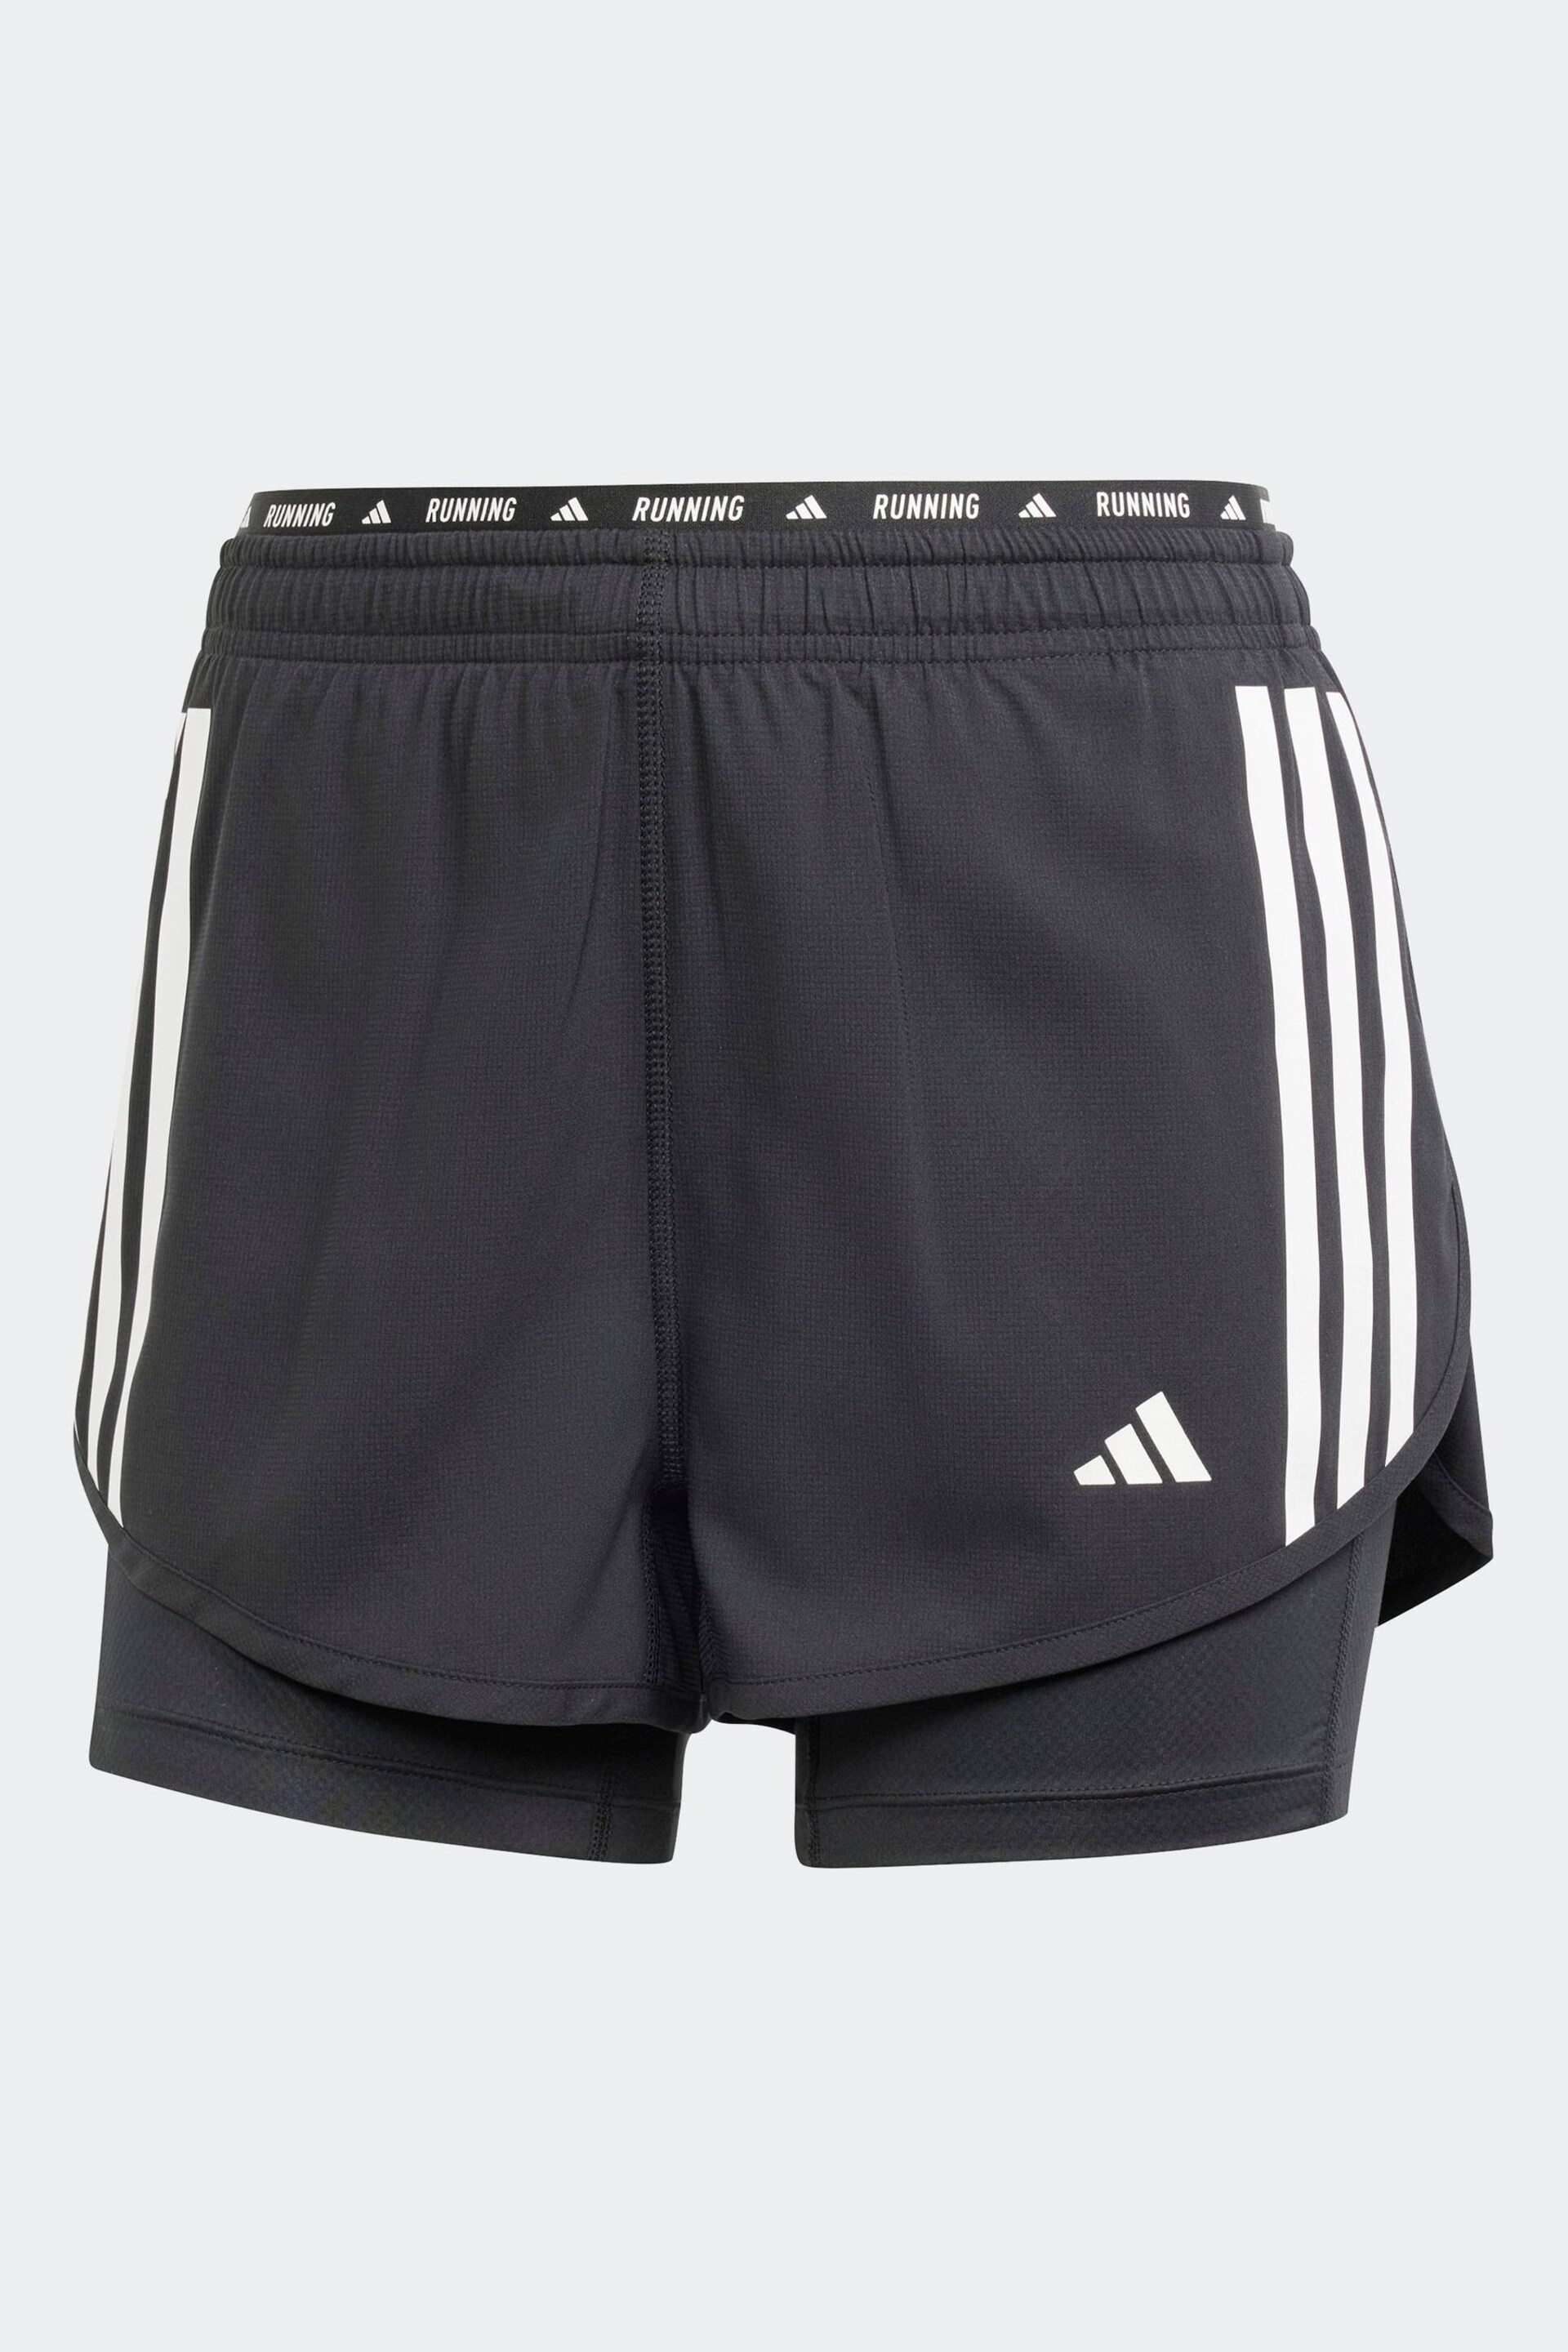 adidas Black 3 Strip 2-in-1 Shorts - Image 6 of 6